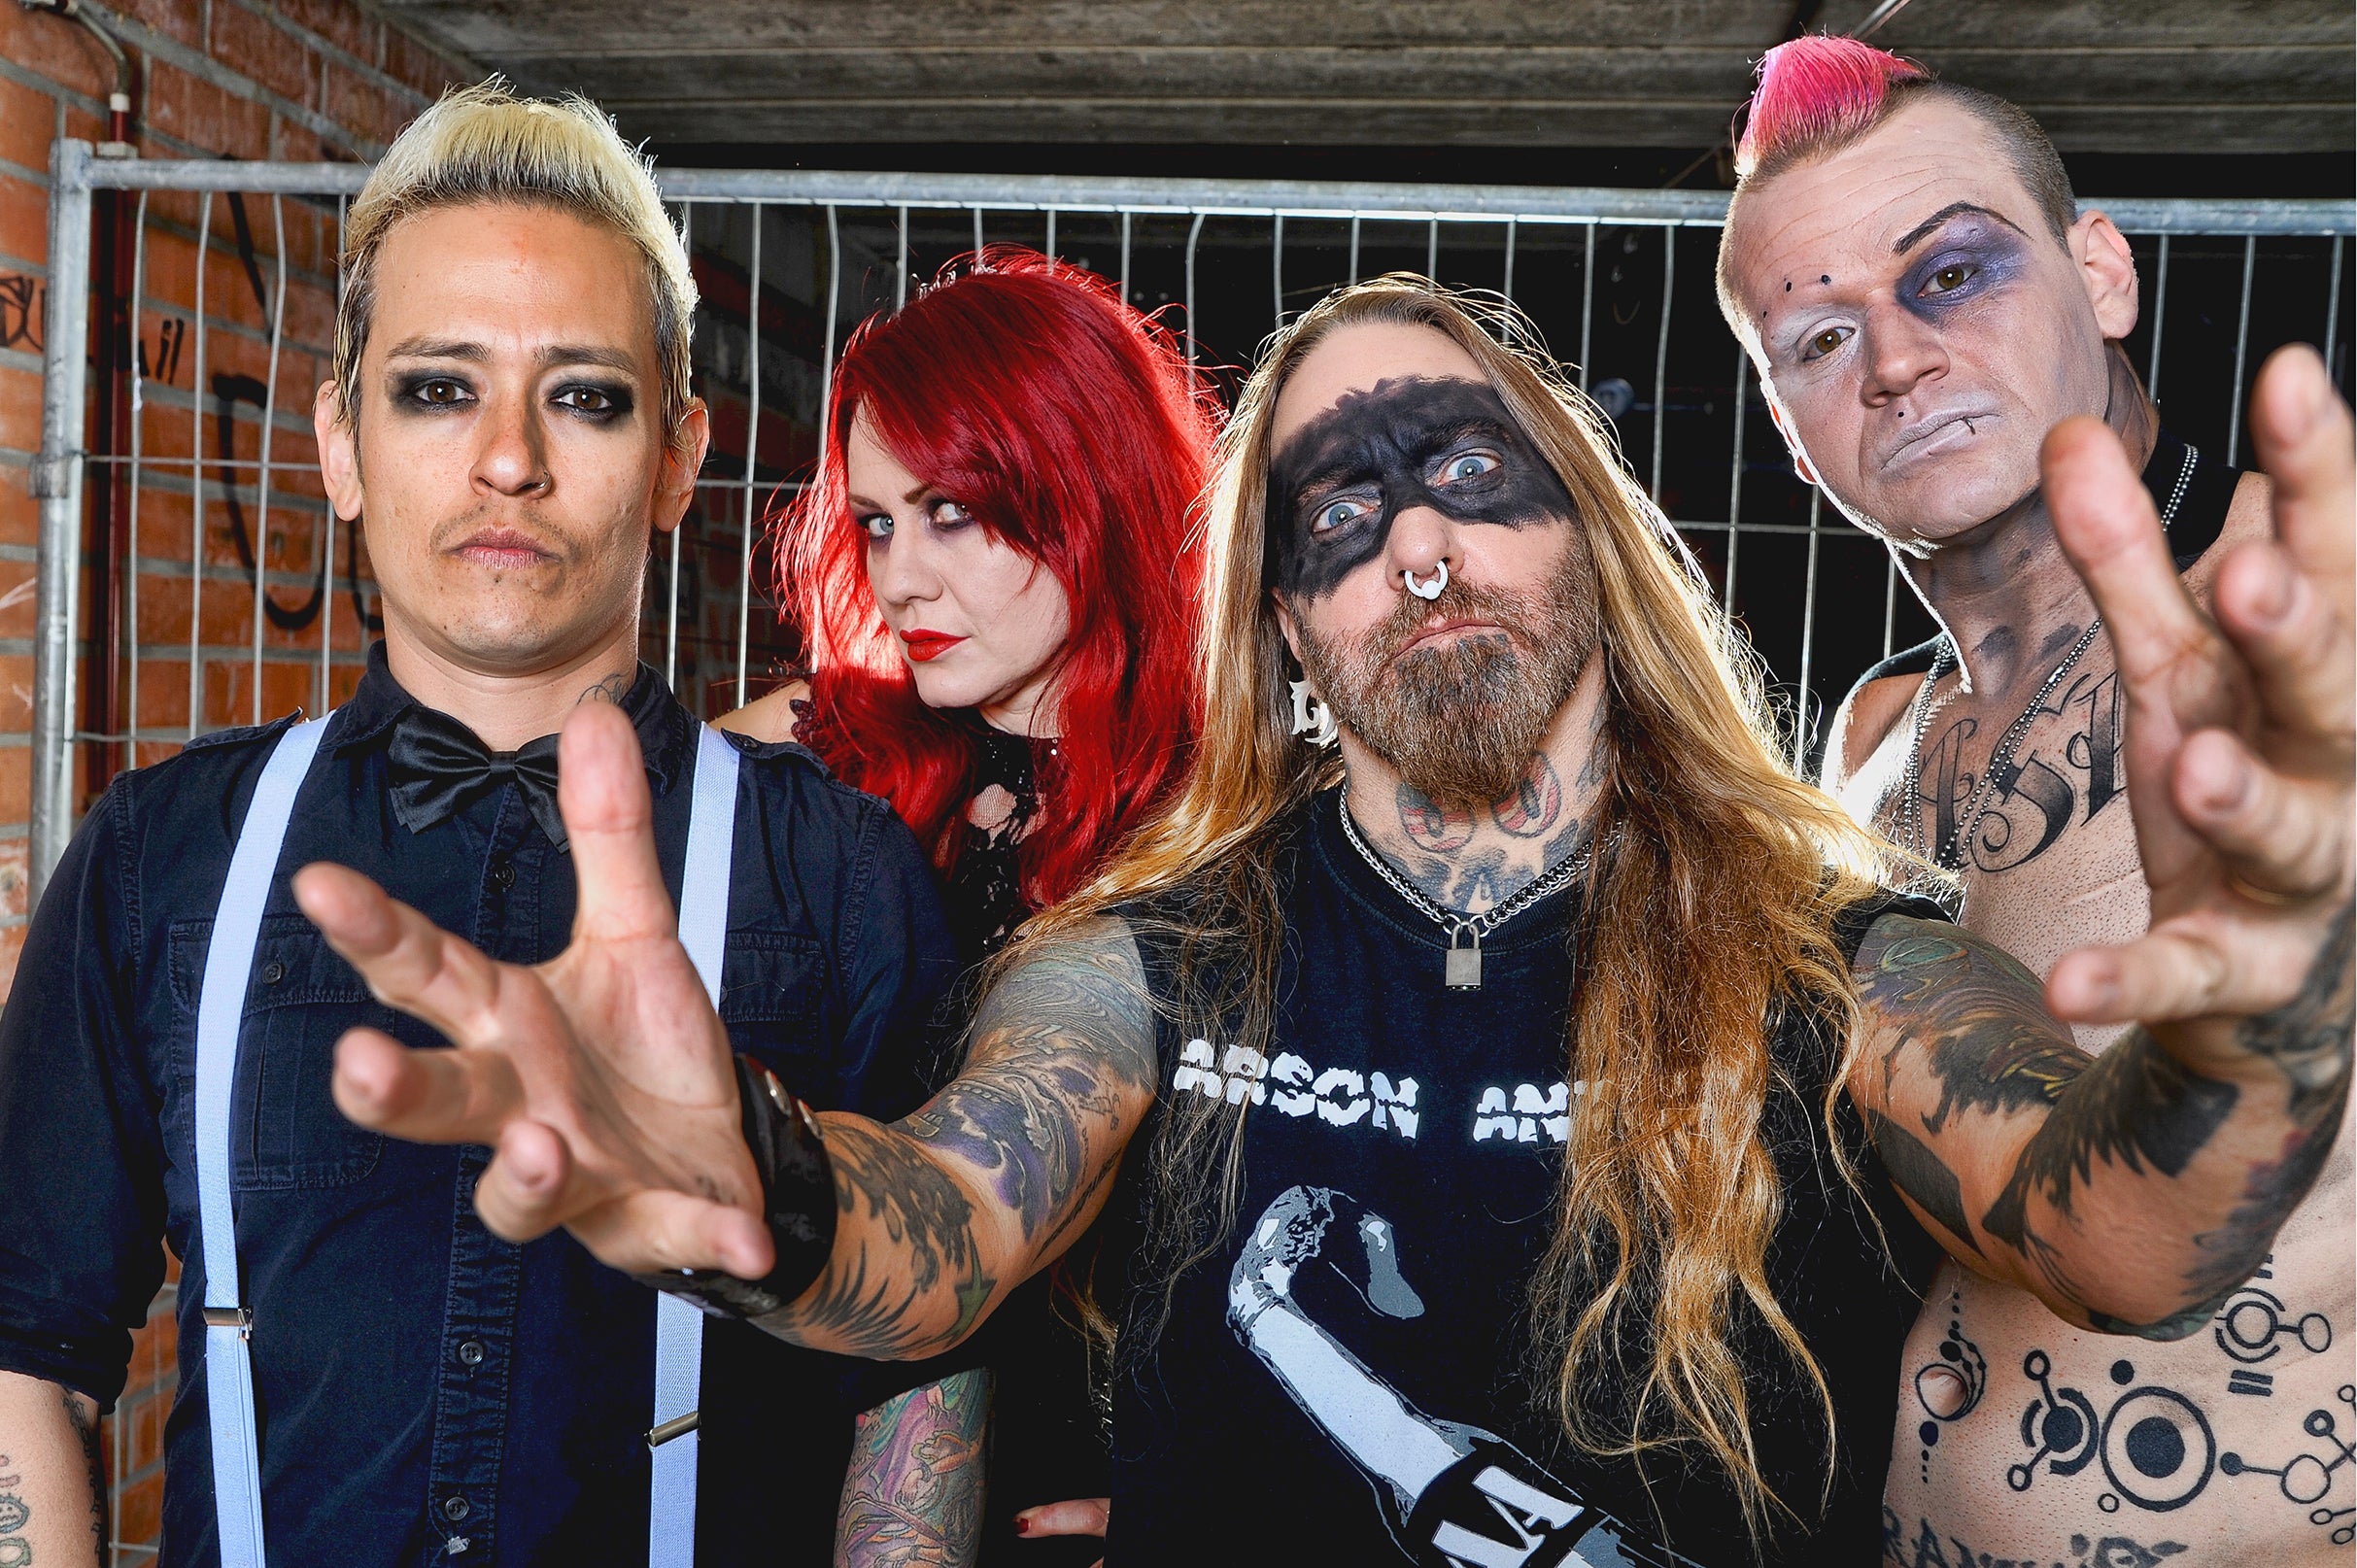 COAL CHAMBER w. Fear Factory, Twiztid, Wednesday 13 & Black Satellite